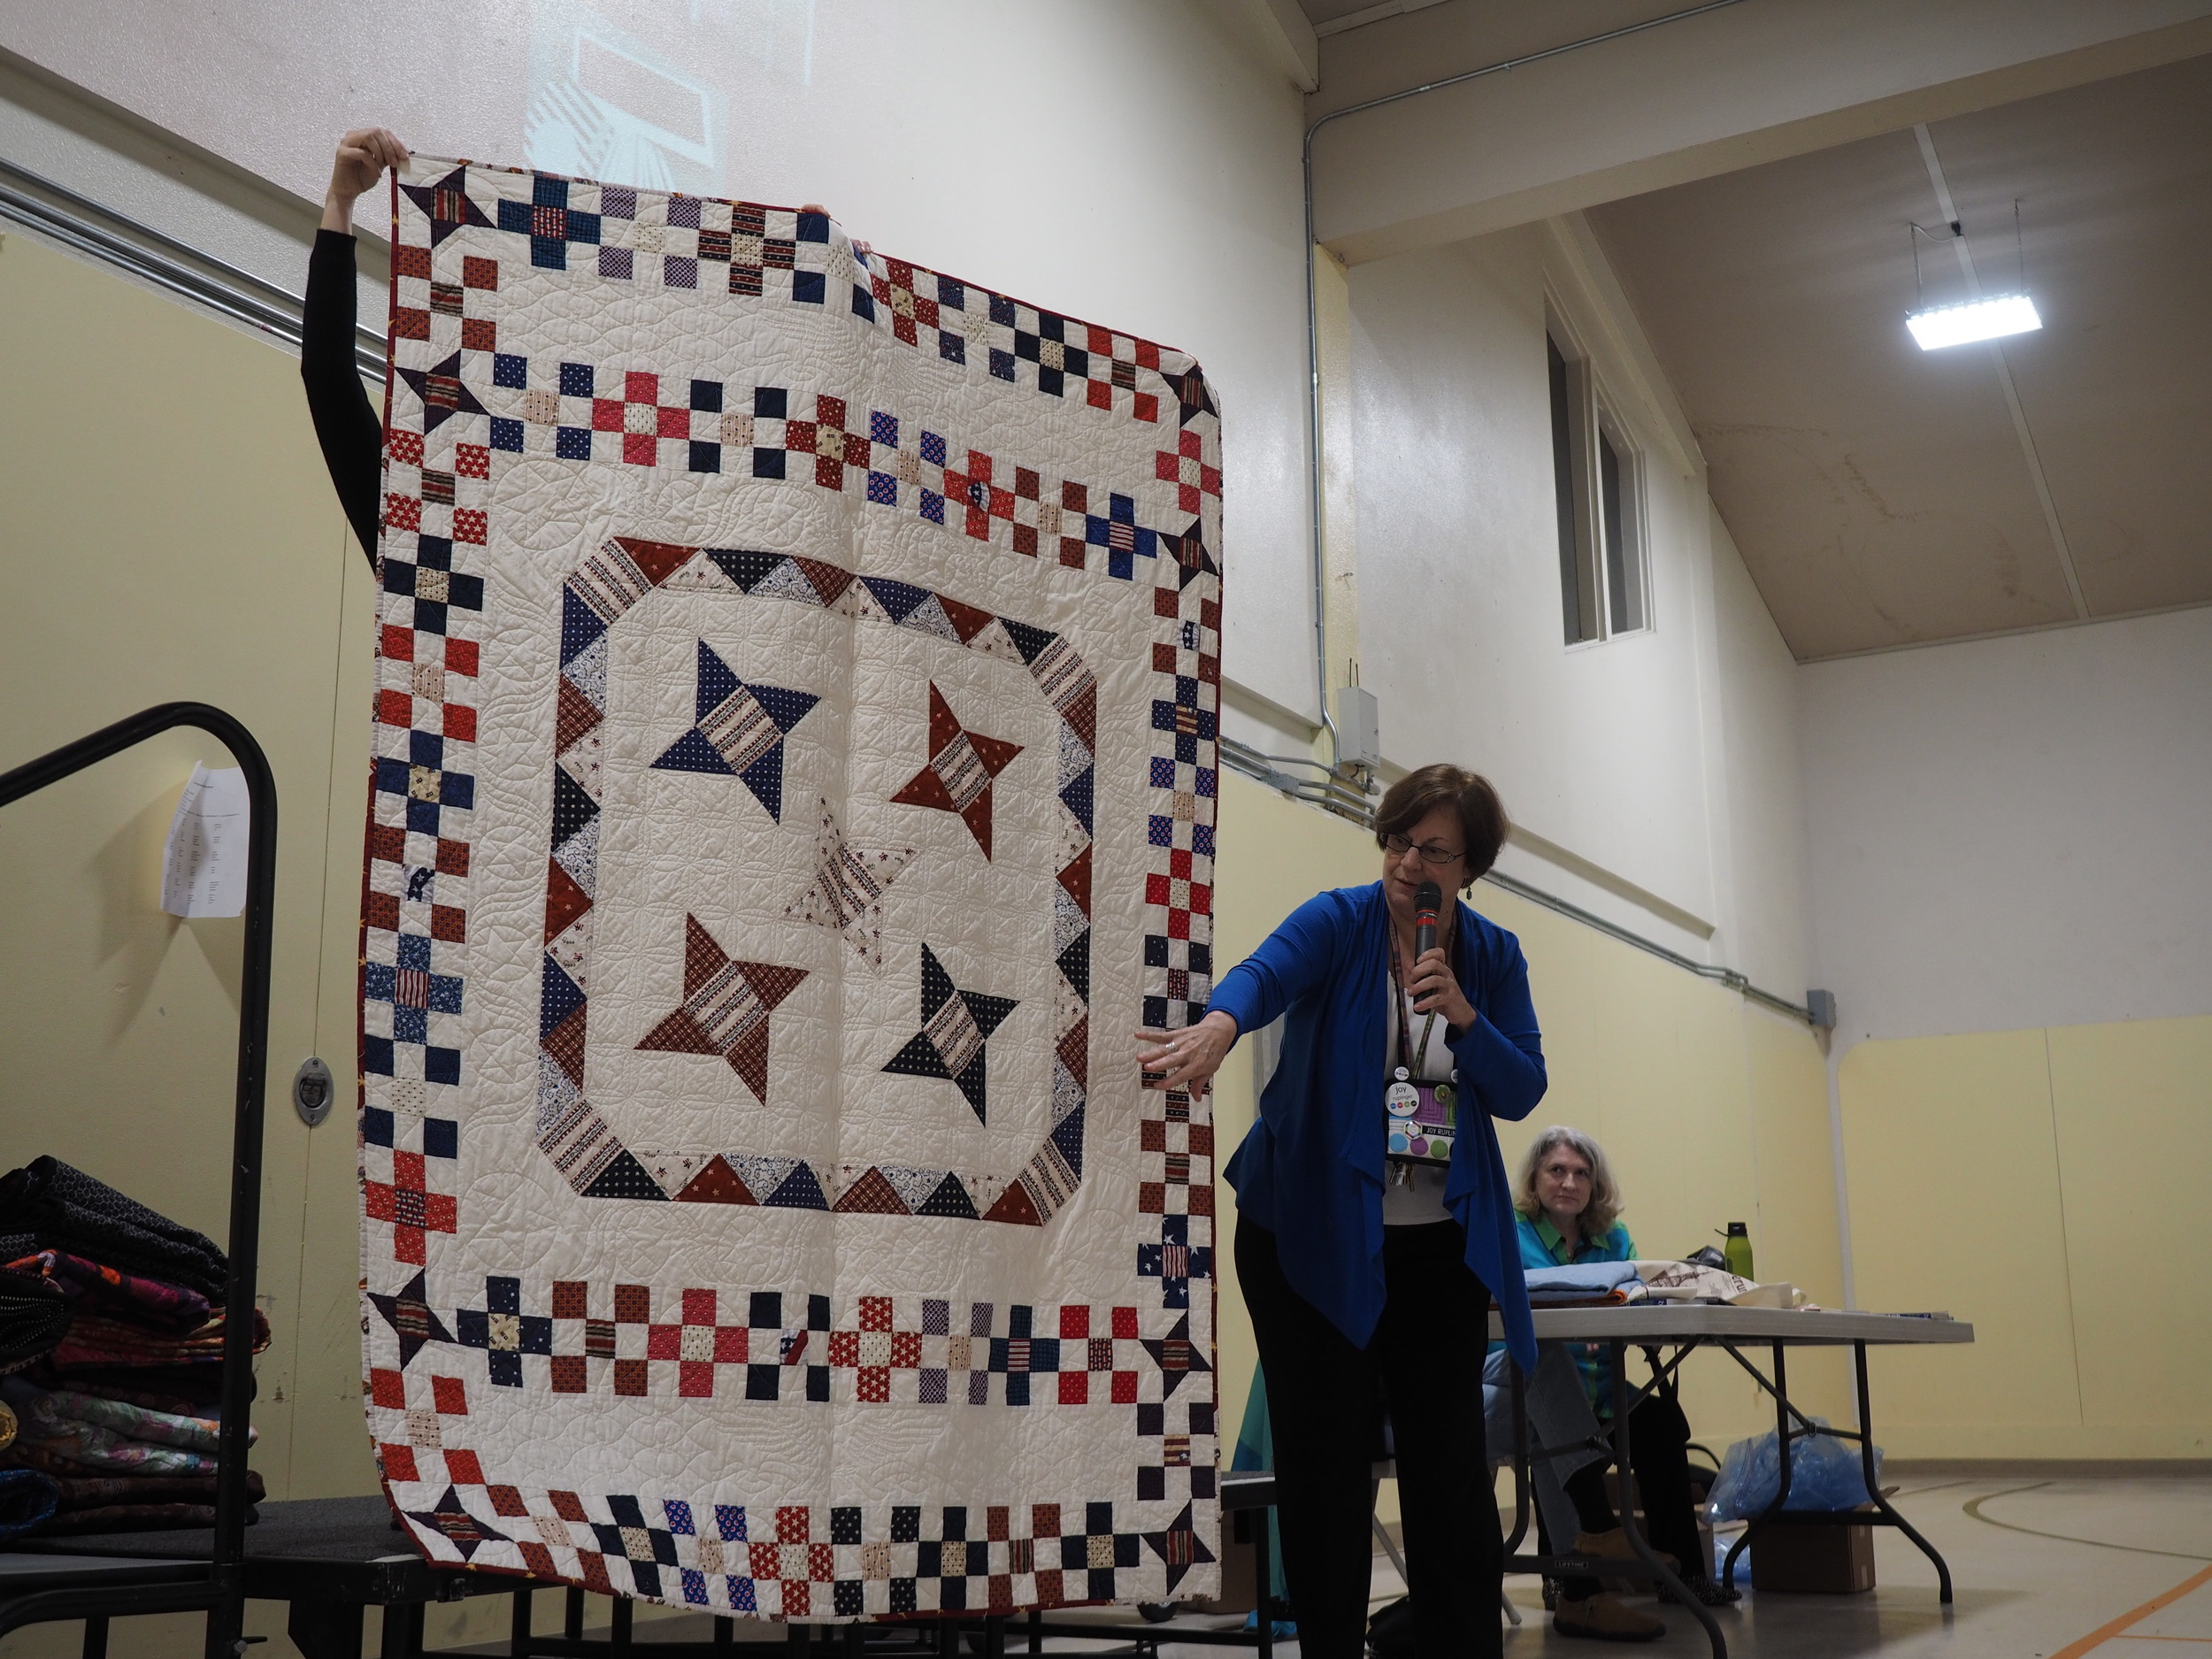 Quilts of Valor